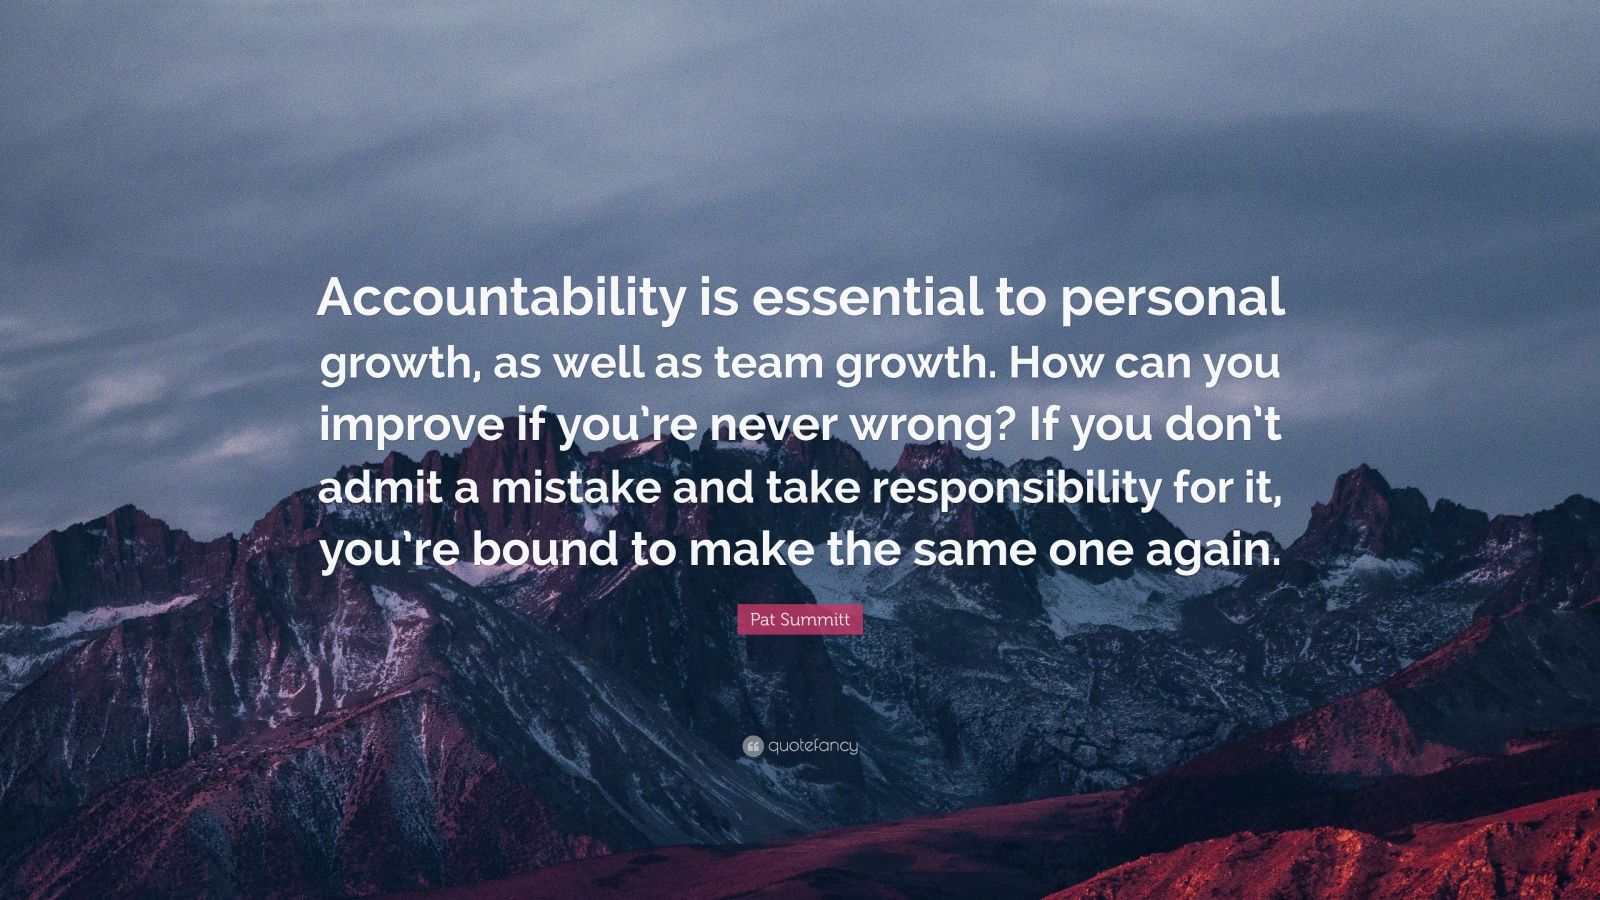 3179495 Pat Summitt Quote Accountability is essential to personal growth